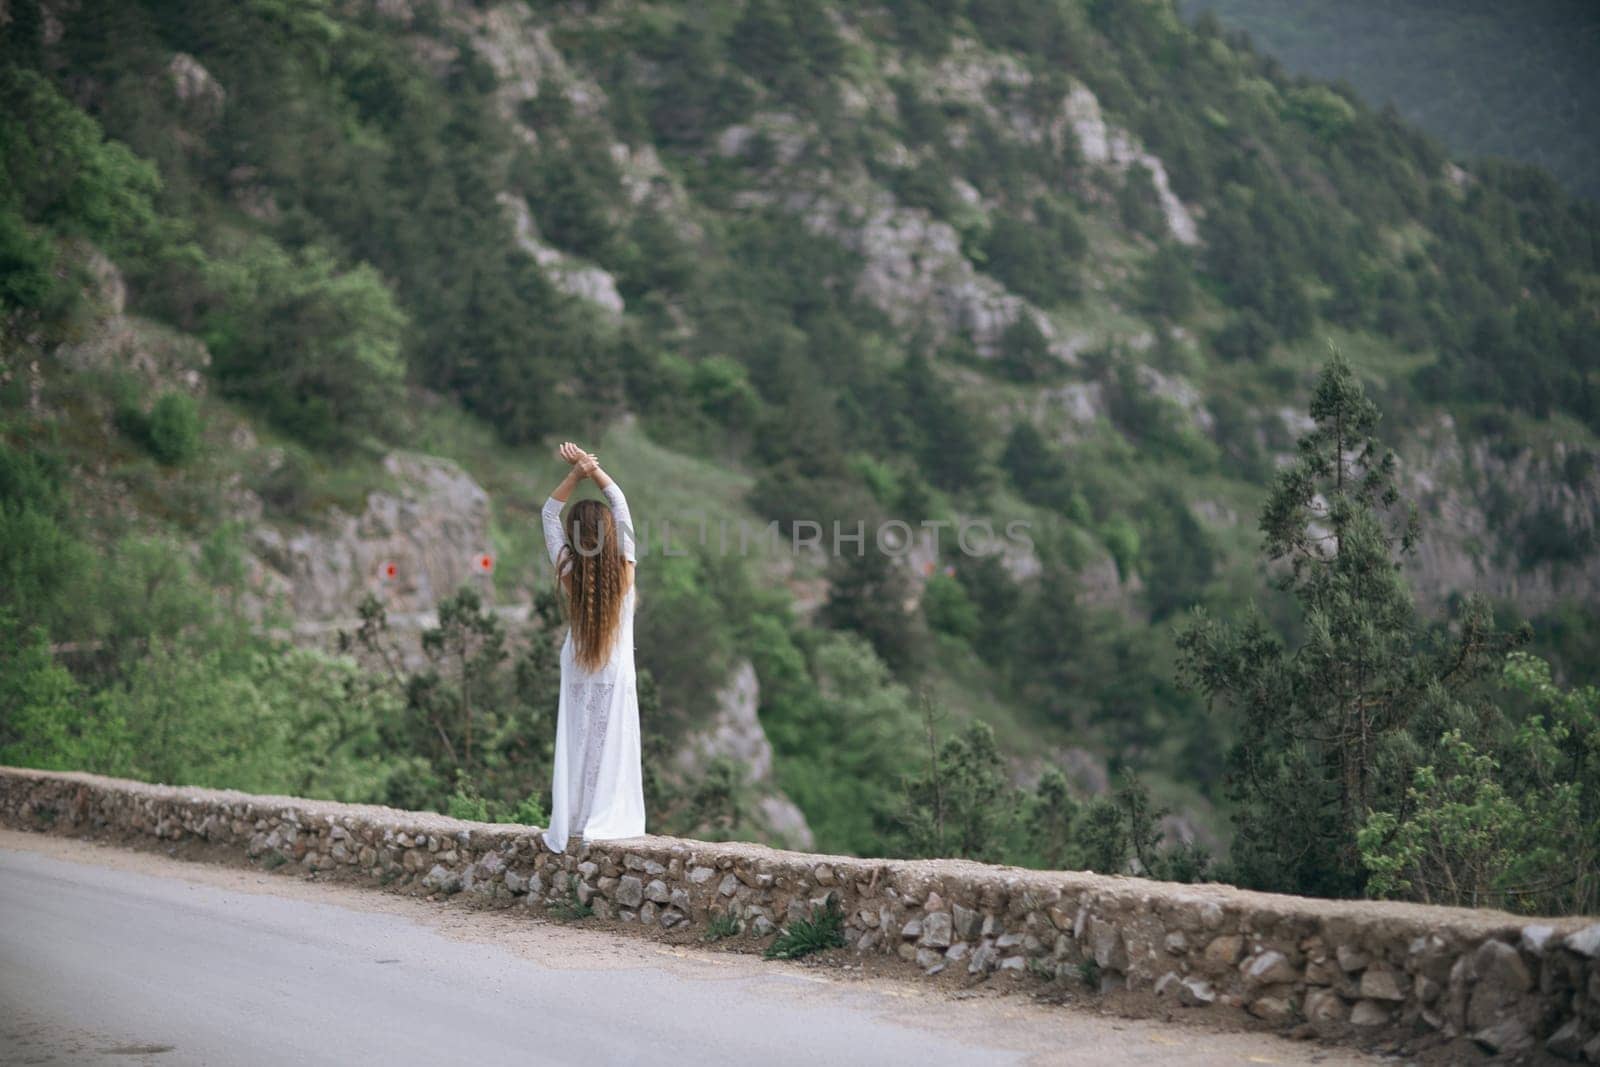 A woman stands on a stone wall overlooking a mountain. She is wearing a white dress and she is in a contemplative mood